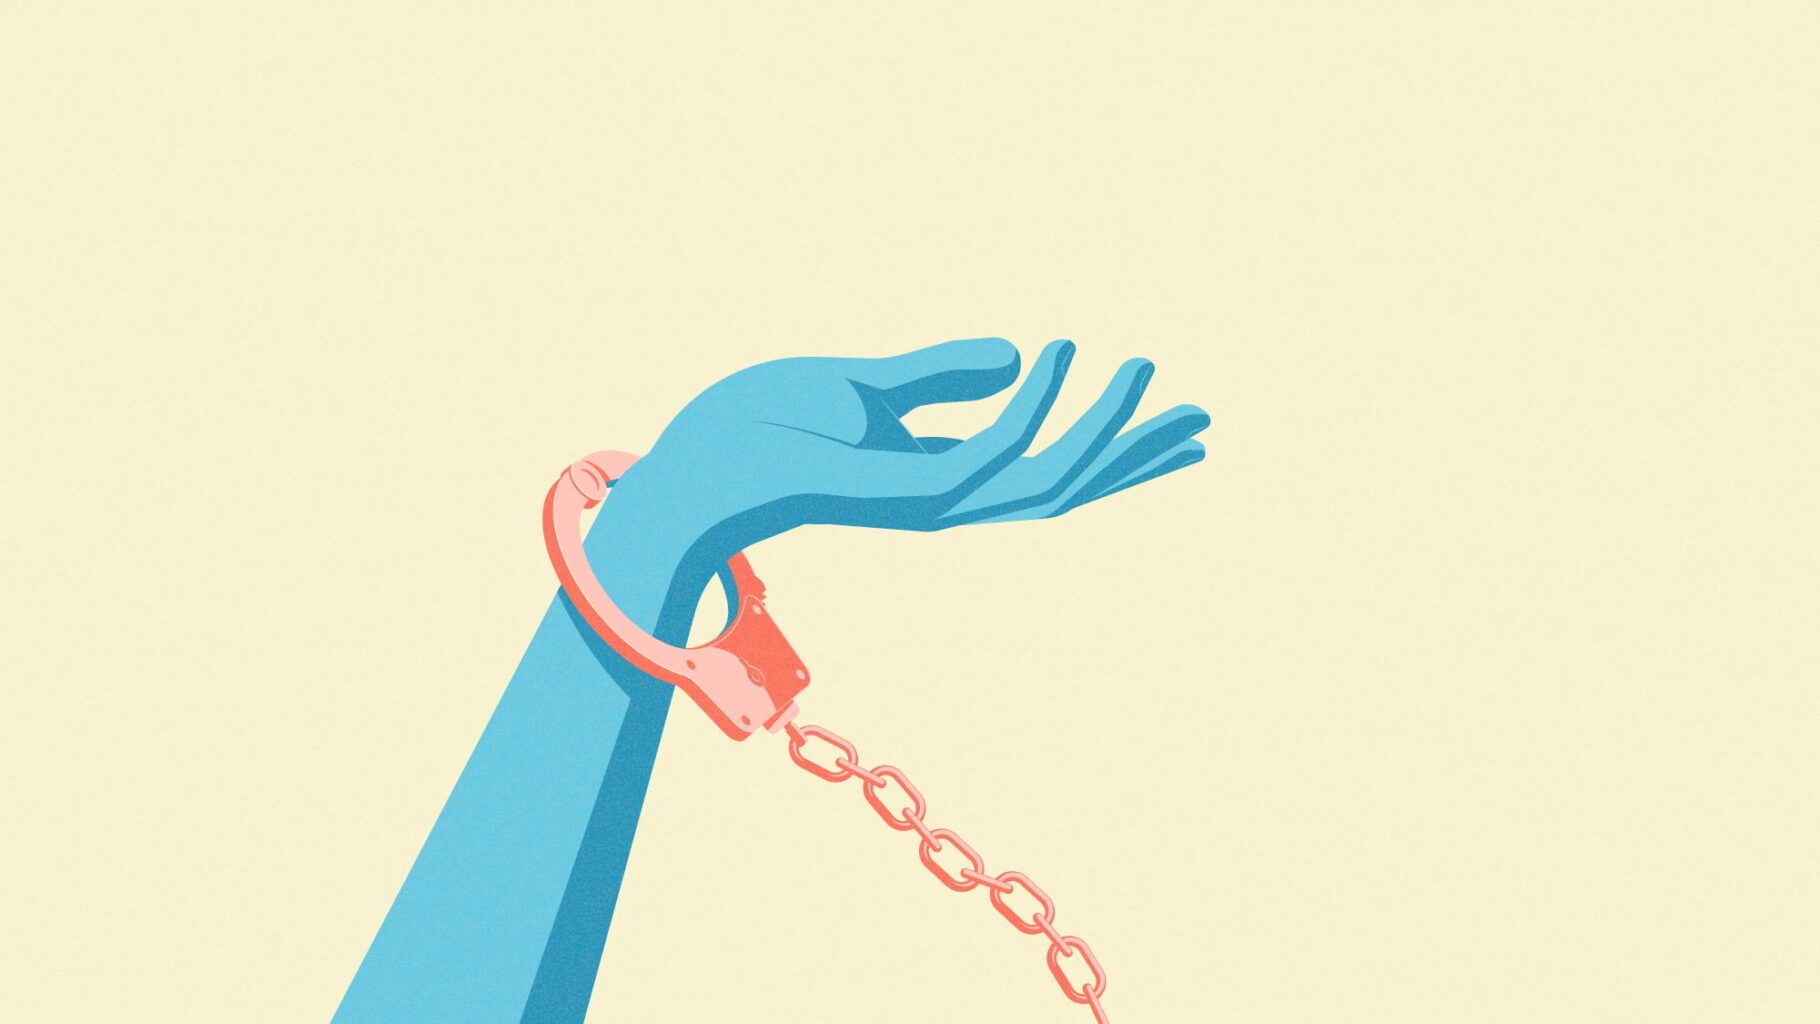 Illustration of a hand with handcuffs